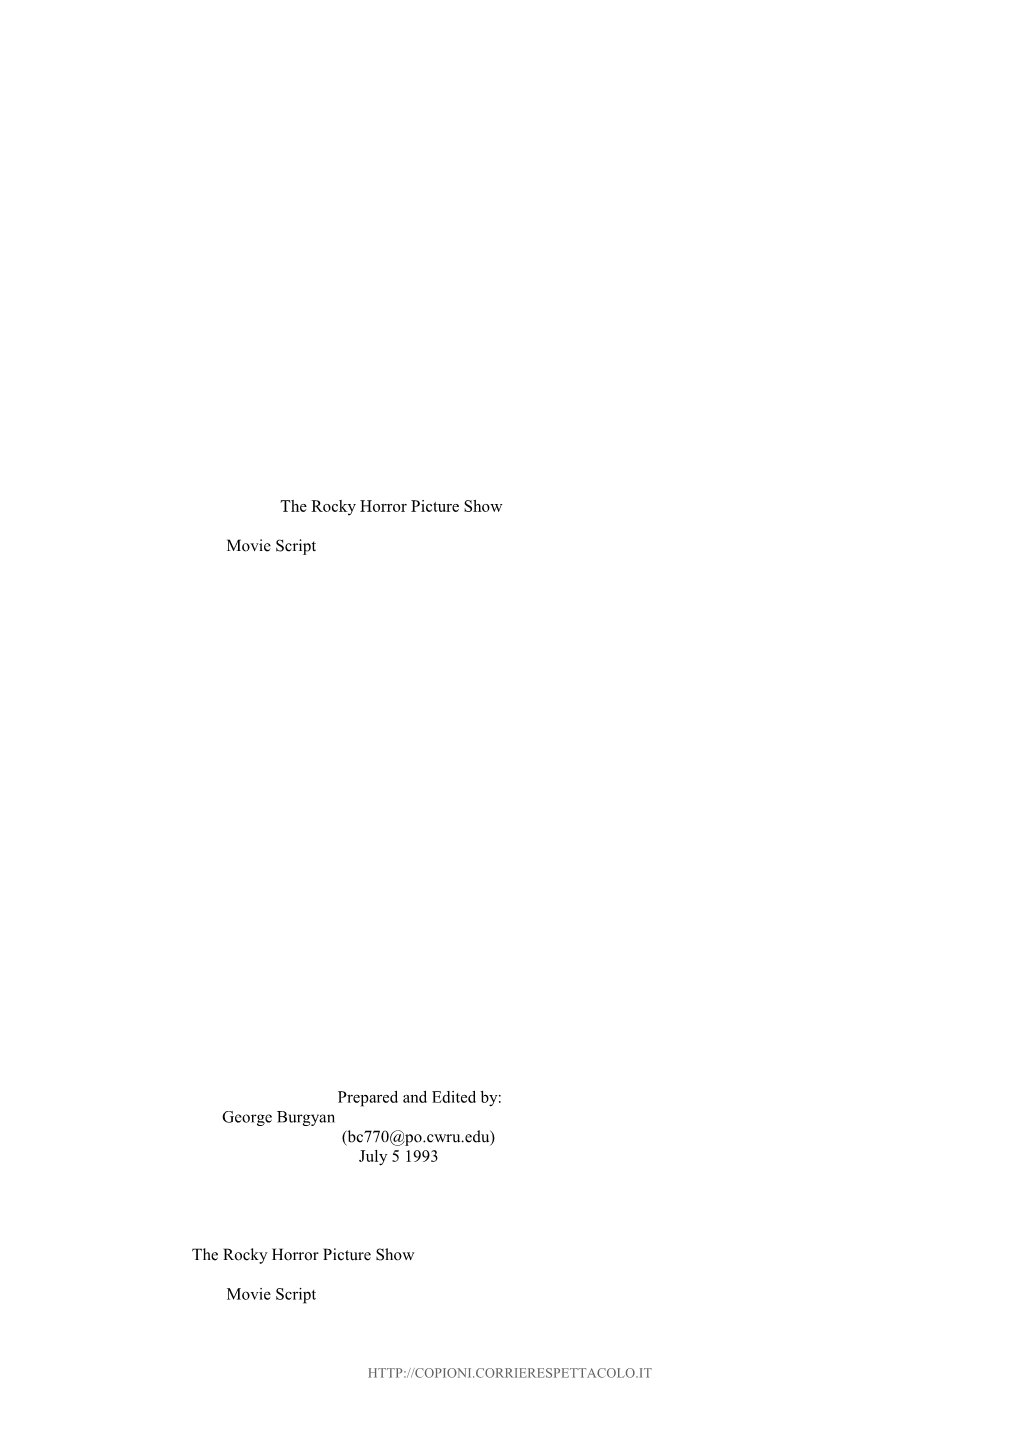 The Rocky Horror Picture Show Movie Script Prepared and Edited By